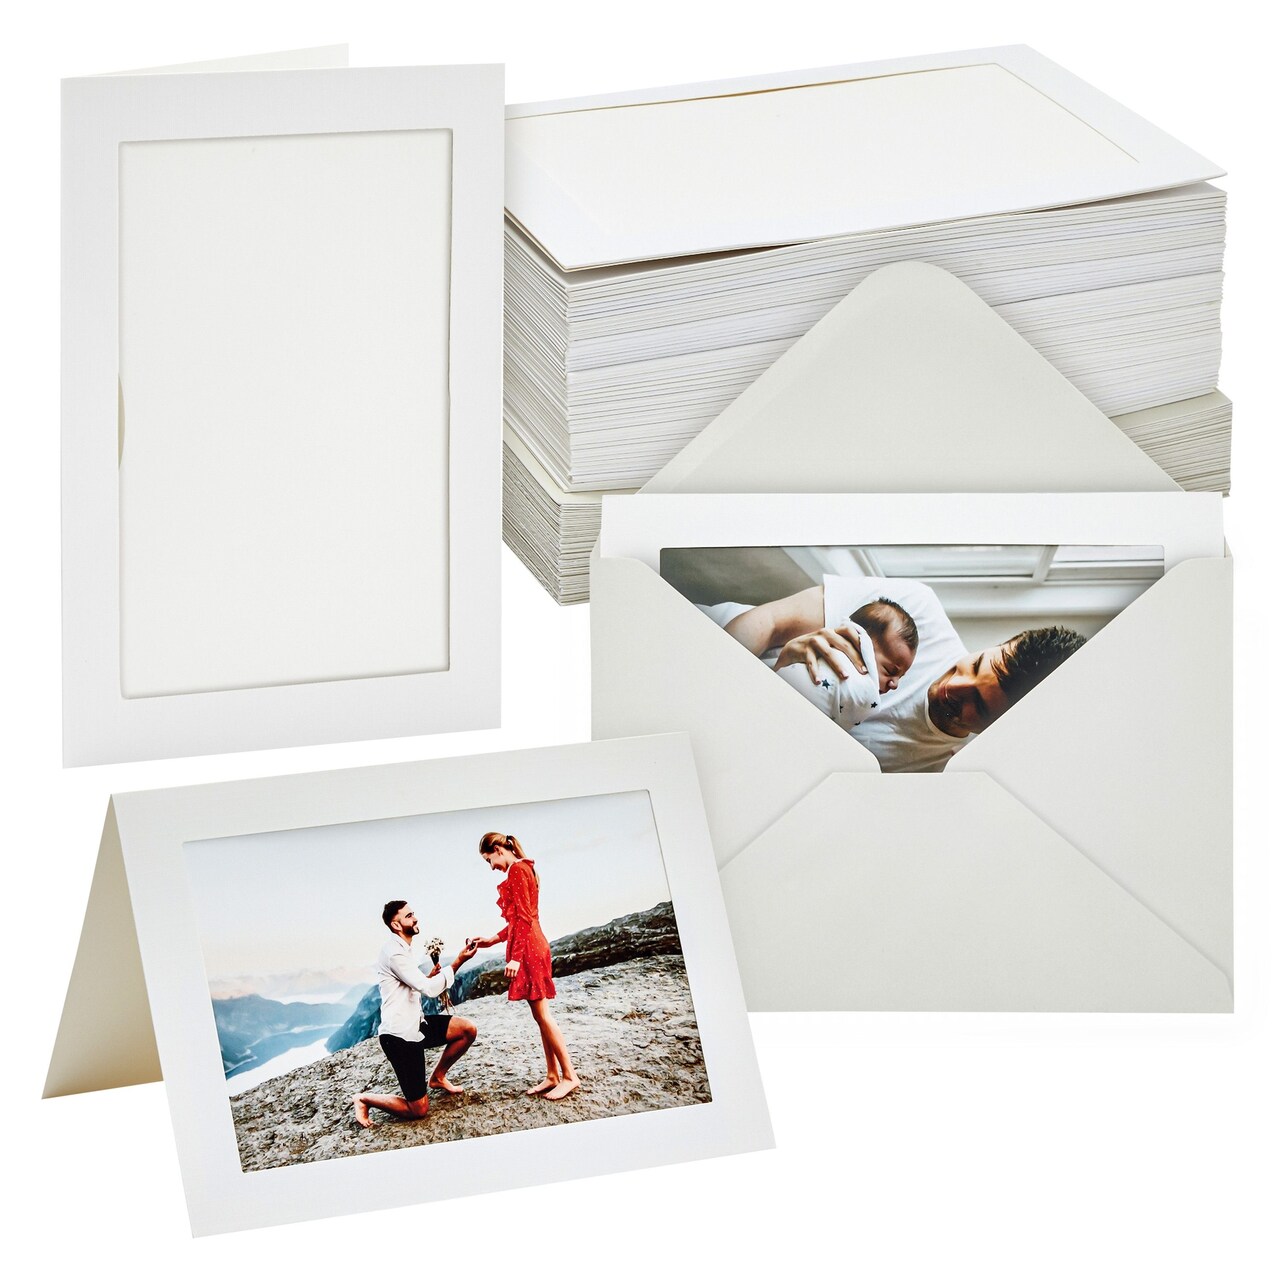 48 Pack Photo Frame Cards 4x6 with Envelopes - Picture Insert Note Cards  for Wedding, Graduation, Anniversary (Textured Ivory Cardstock)